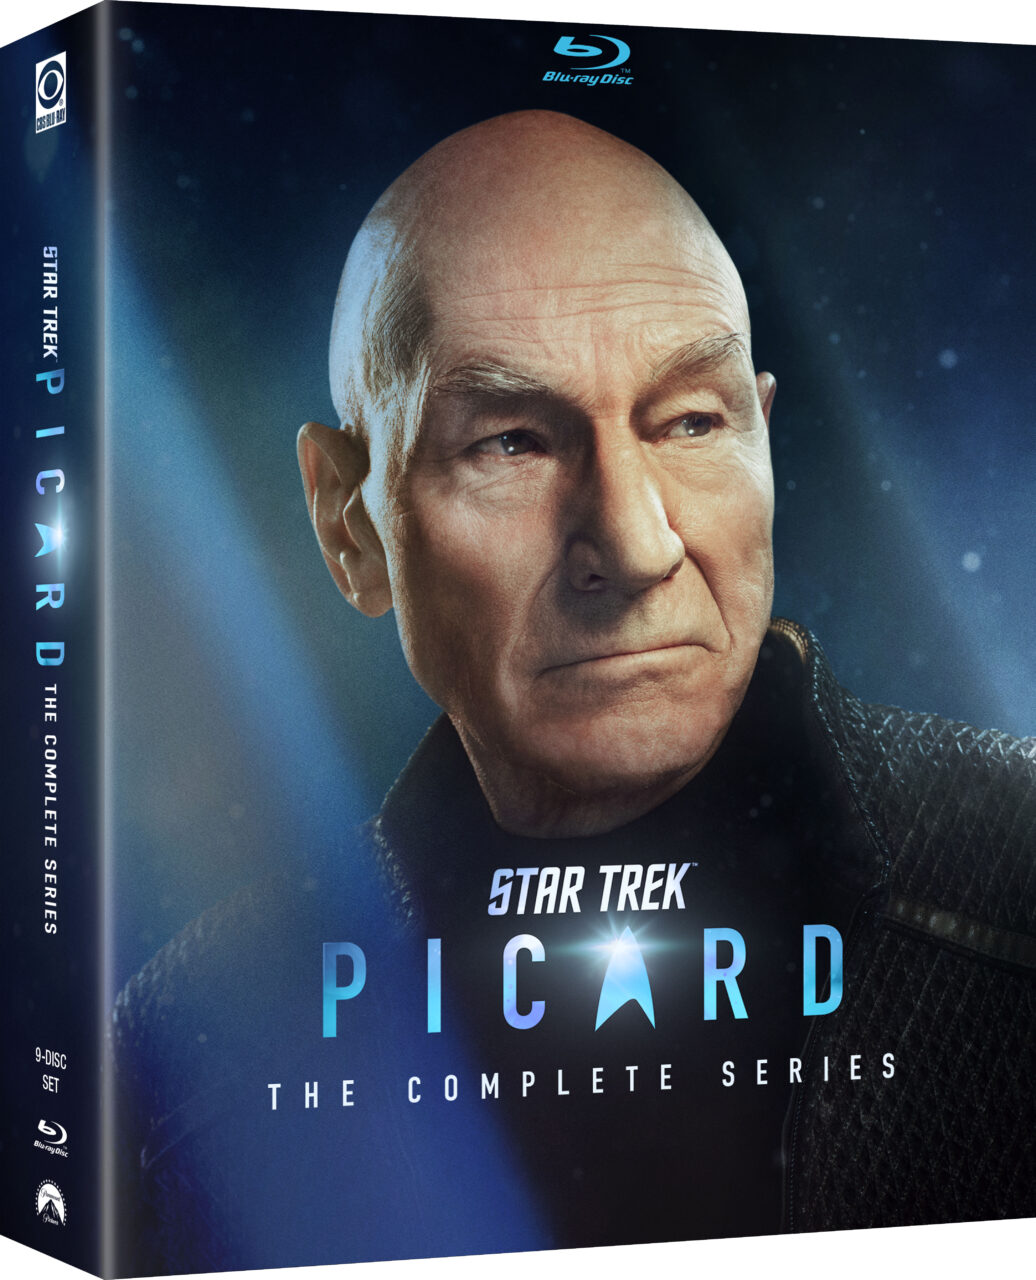 Star Trek: Picard - The Legacy Collection DVD cover (Paramount Home Entertainment)